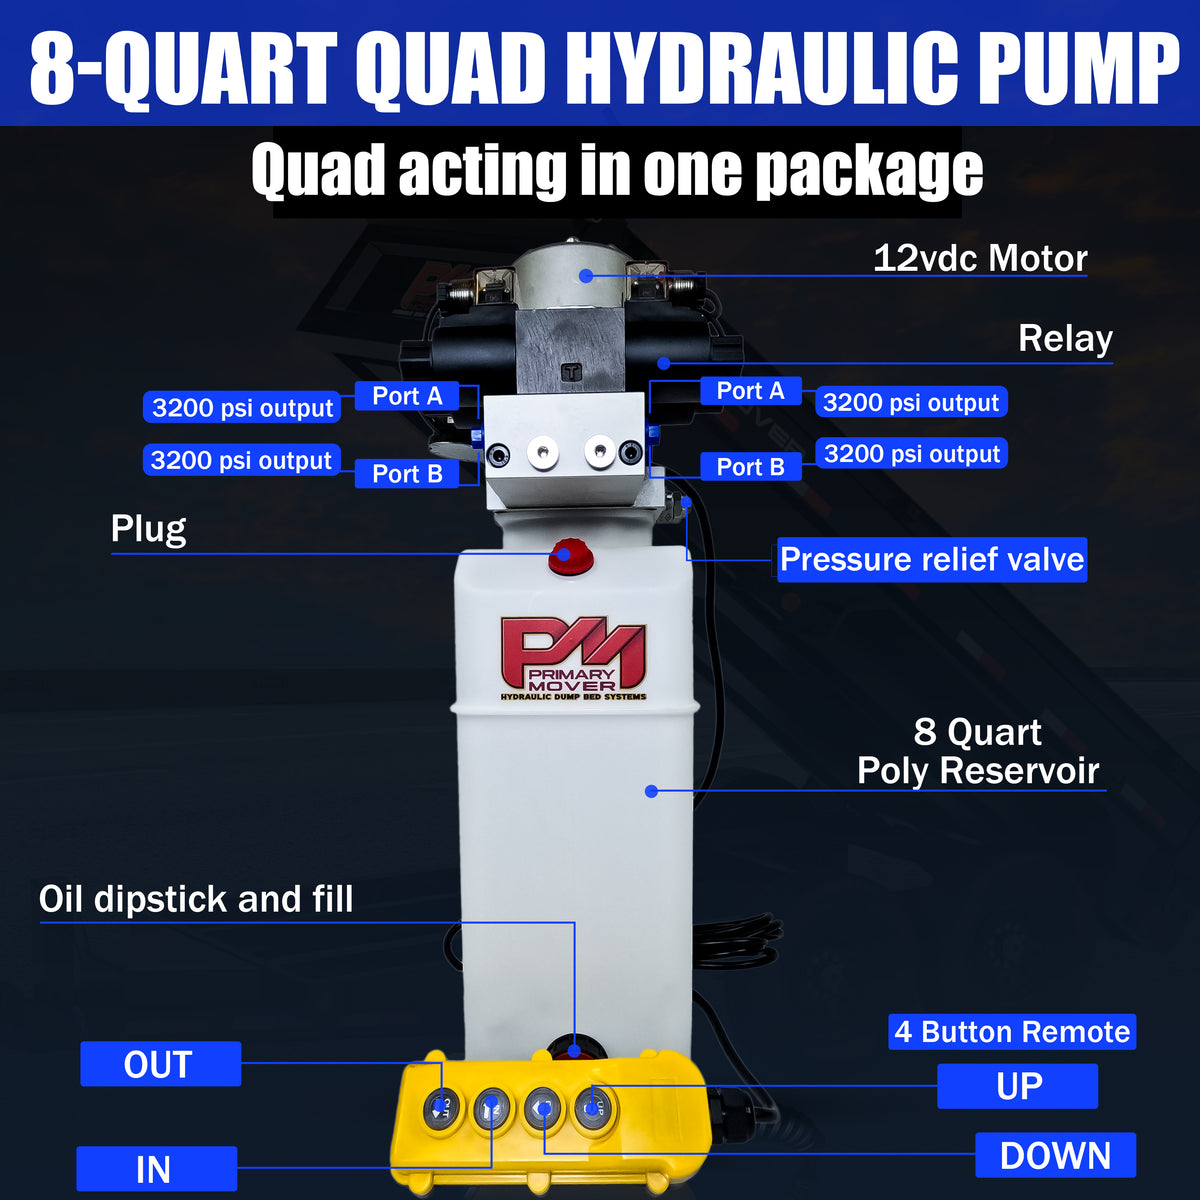 Diagram of a versatile Dual Double Hydraulic Power Unit from PrimaryMover.com, showcasing compact design for dump trailers and trucks.